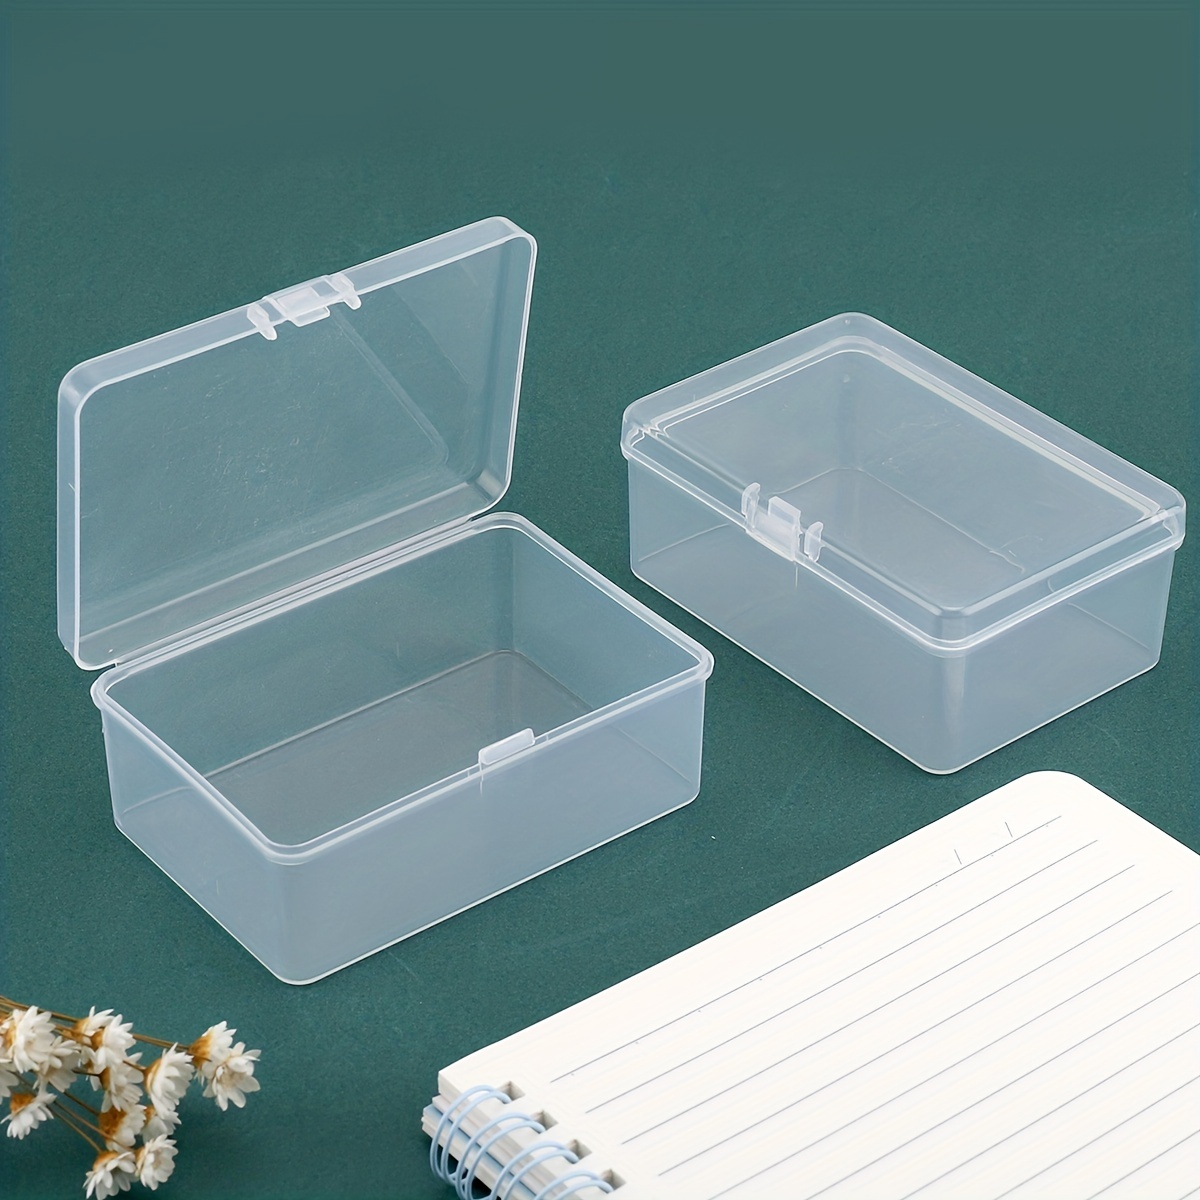 6 Colors Mini Plastic Boxes Small Plastic Storage Containers With Locking  Lids Clear Plastic Organizer Assorted